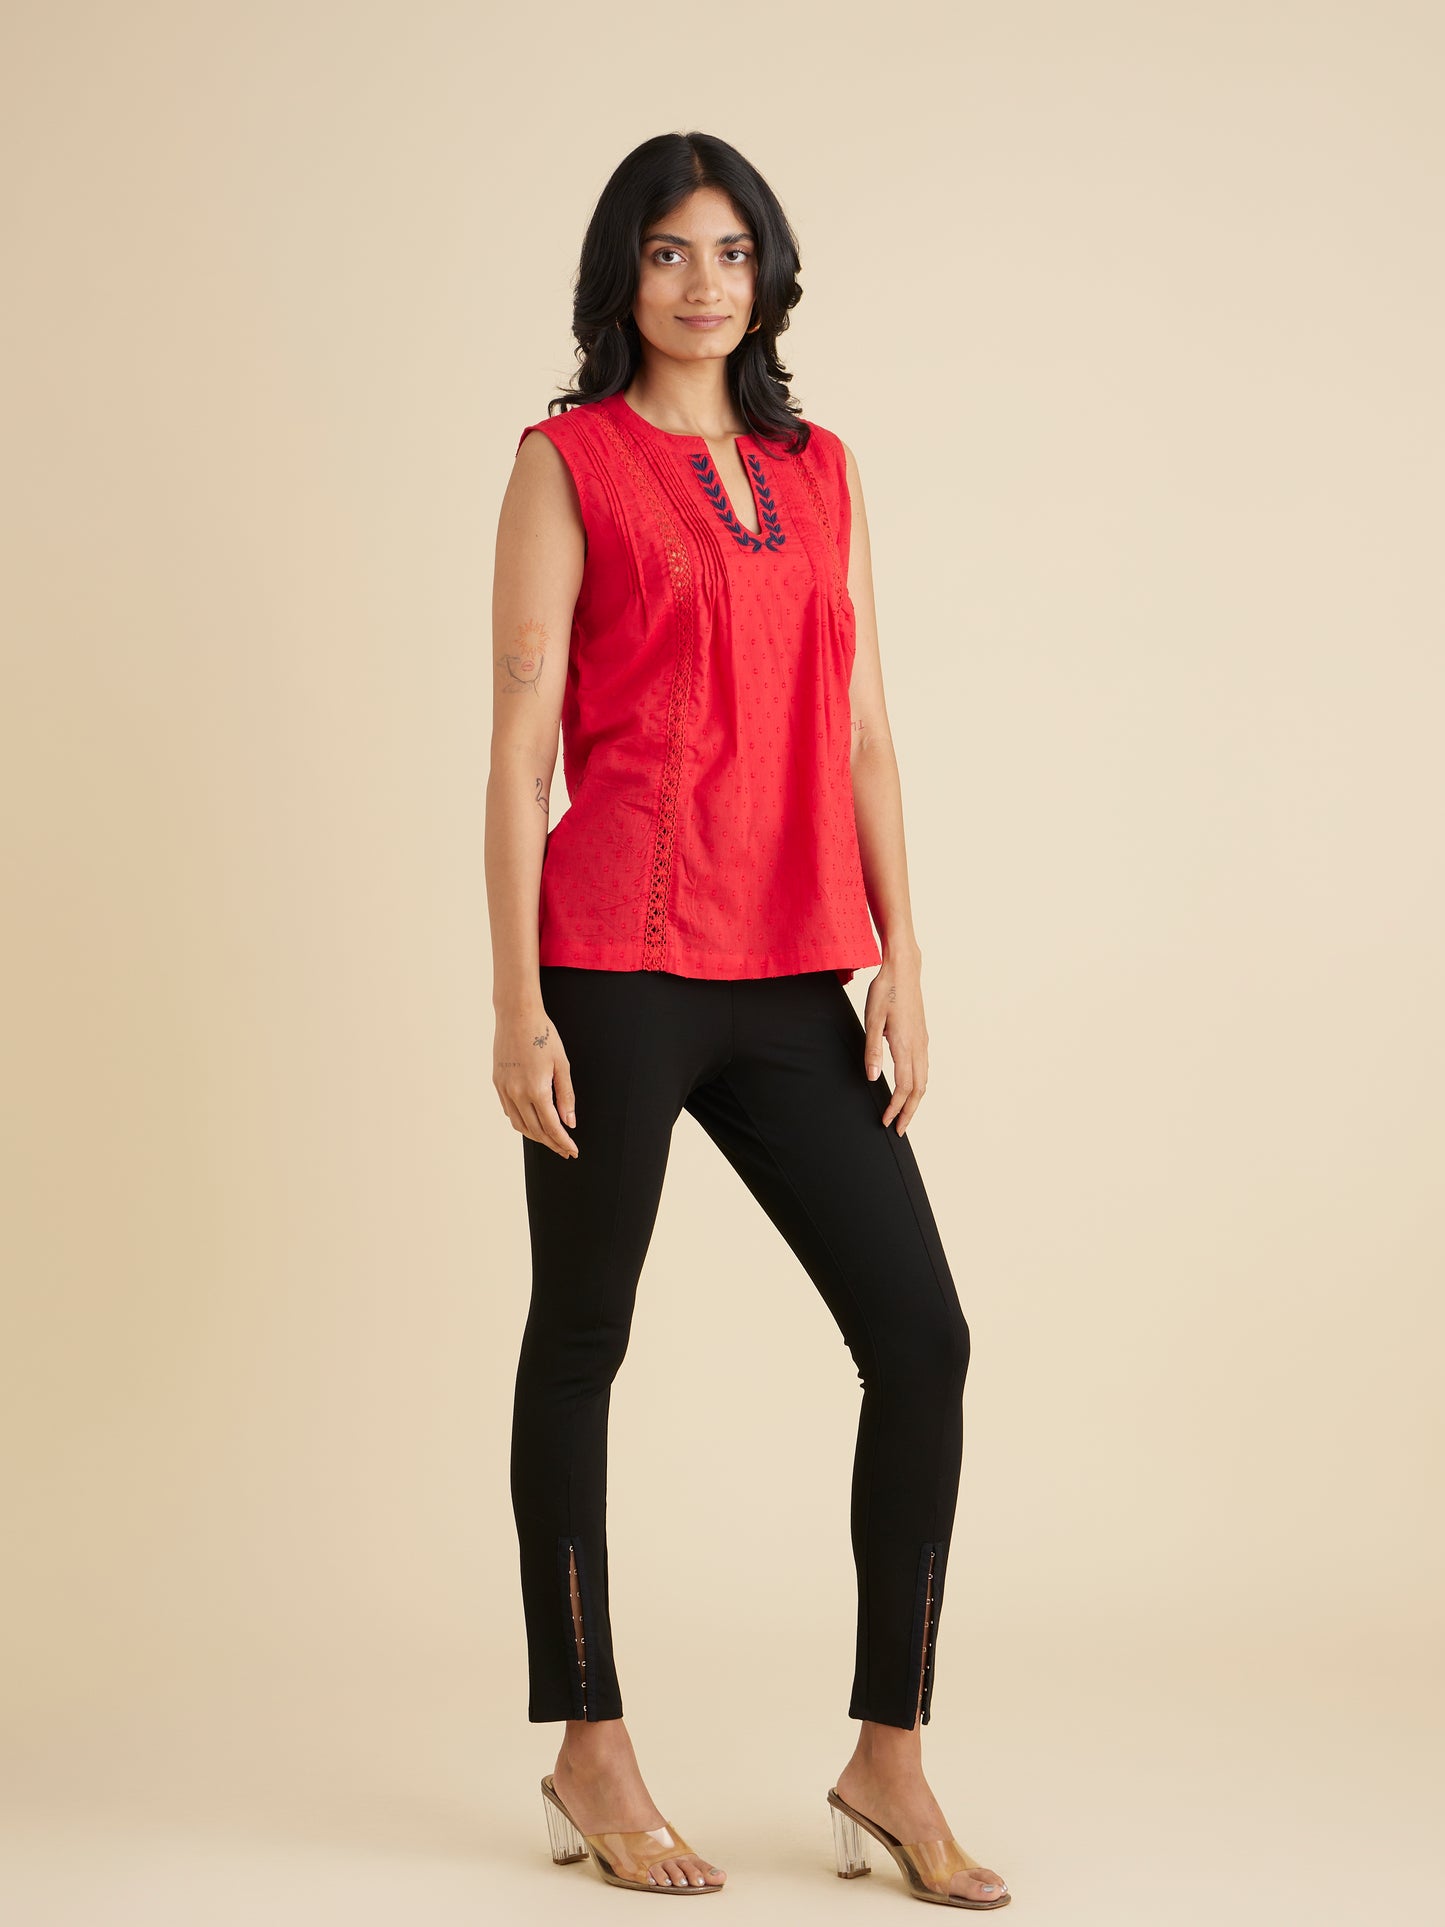 The Isla Hume Top Red